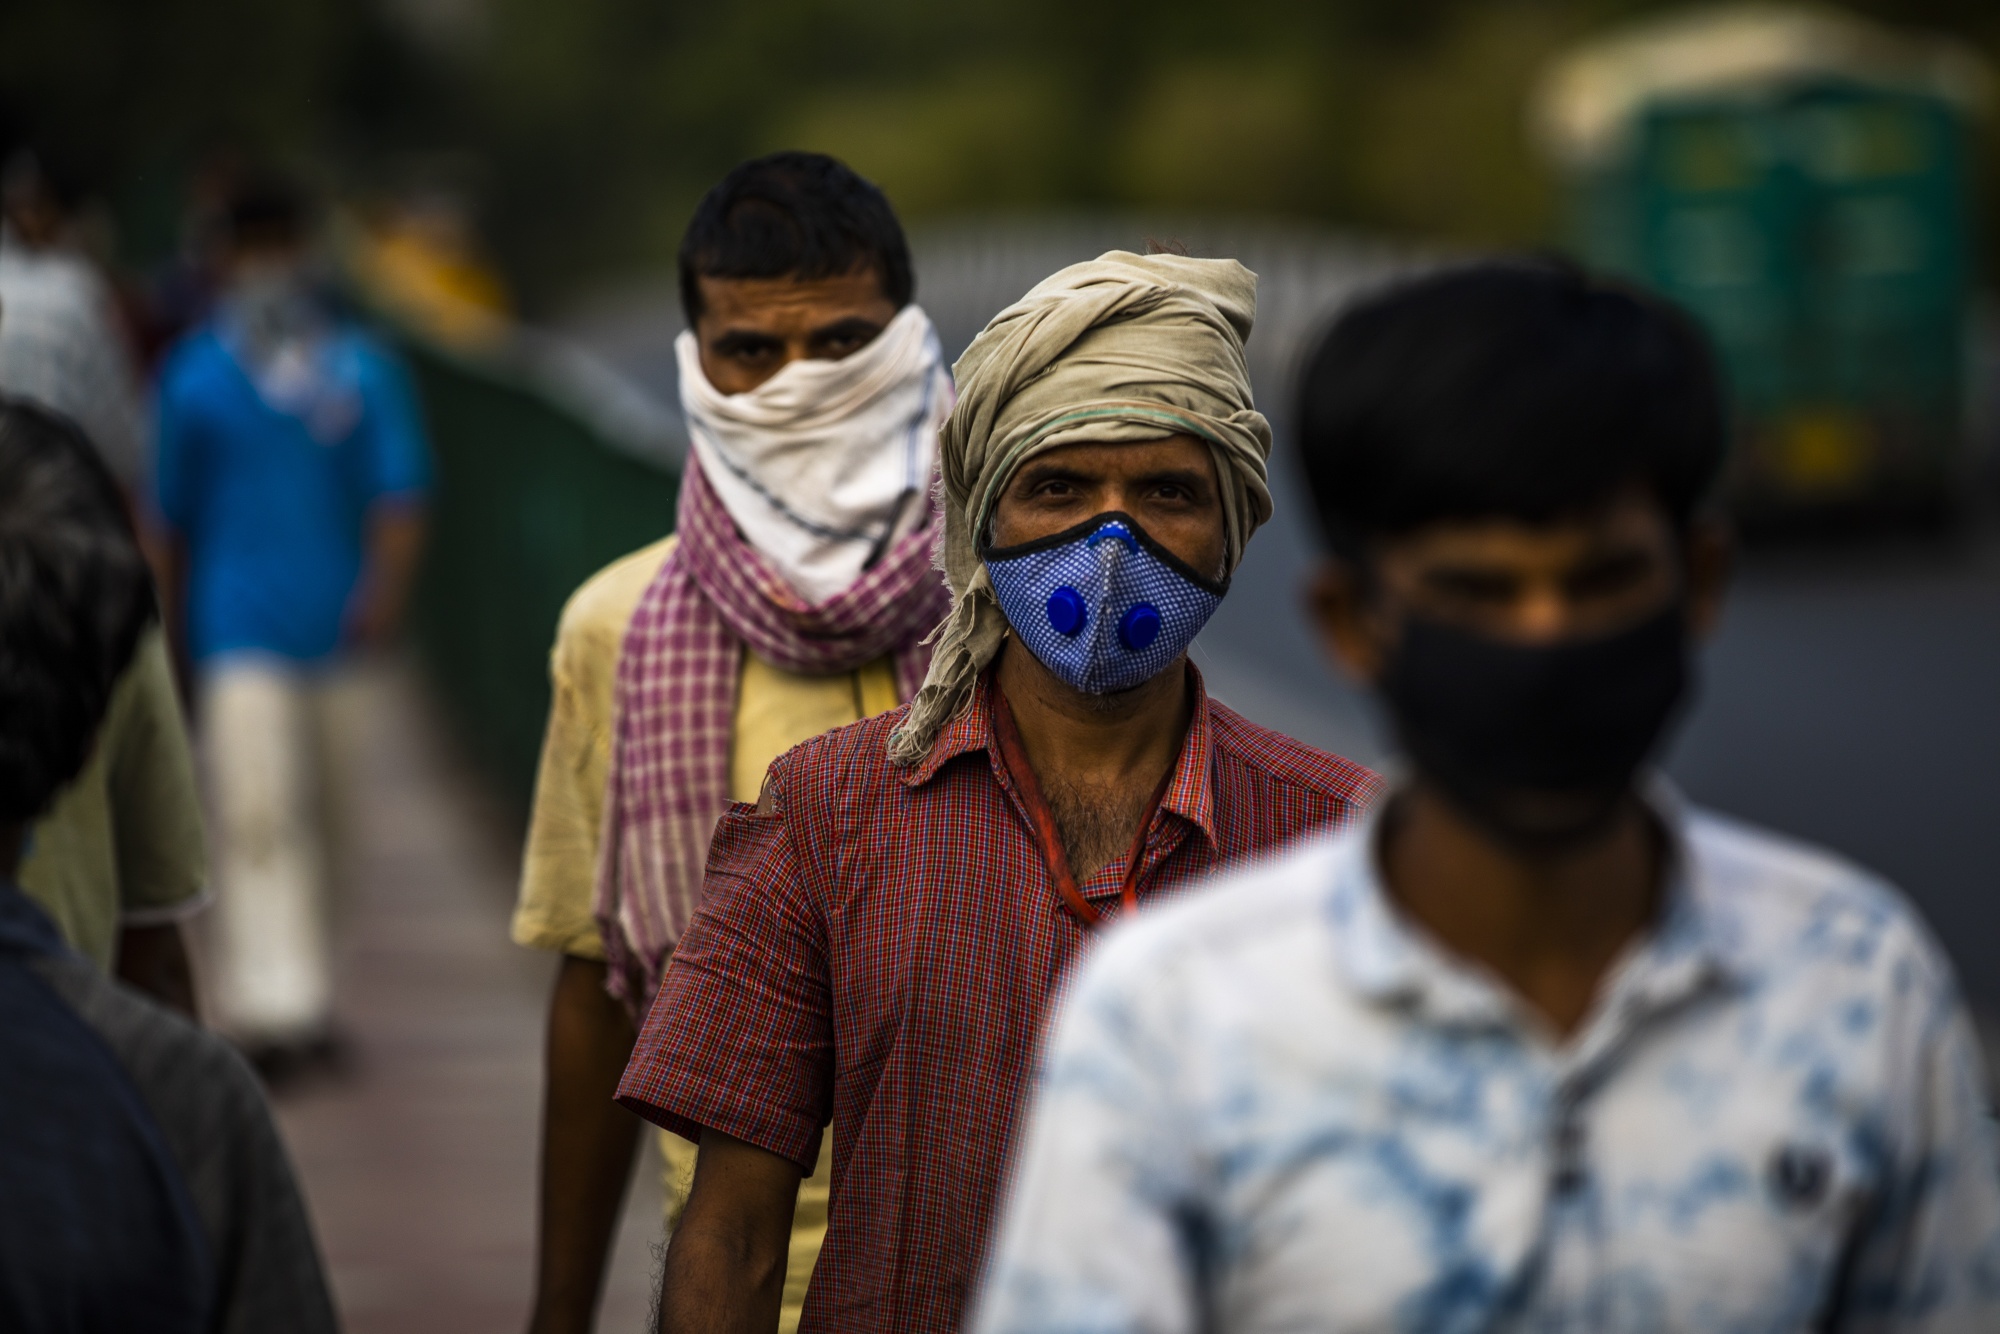 People wear face masks during a partial lockdown in New Delhi, India, on May 14.